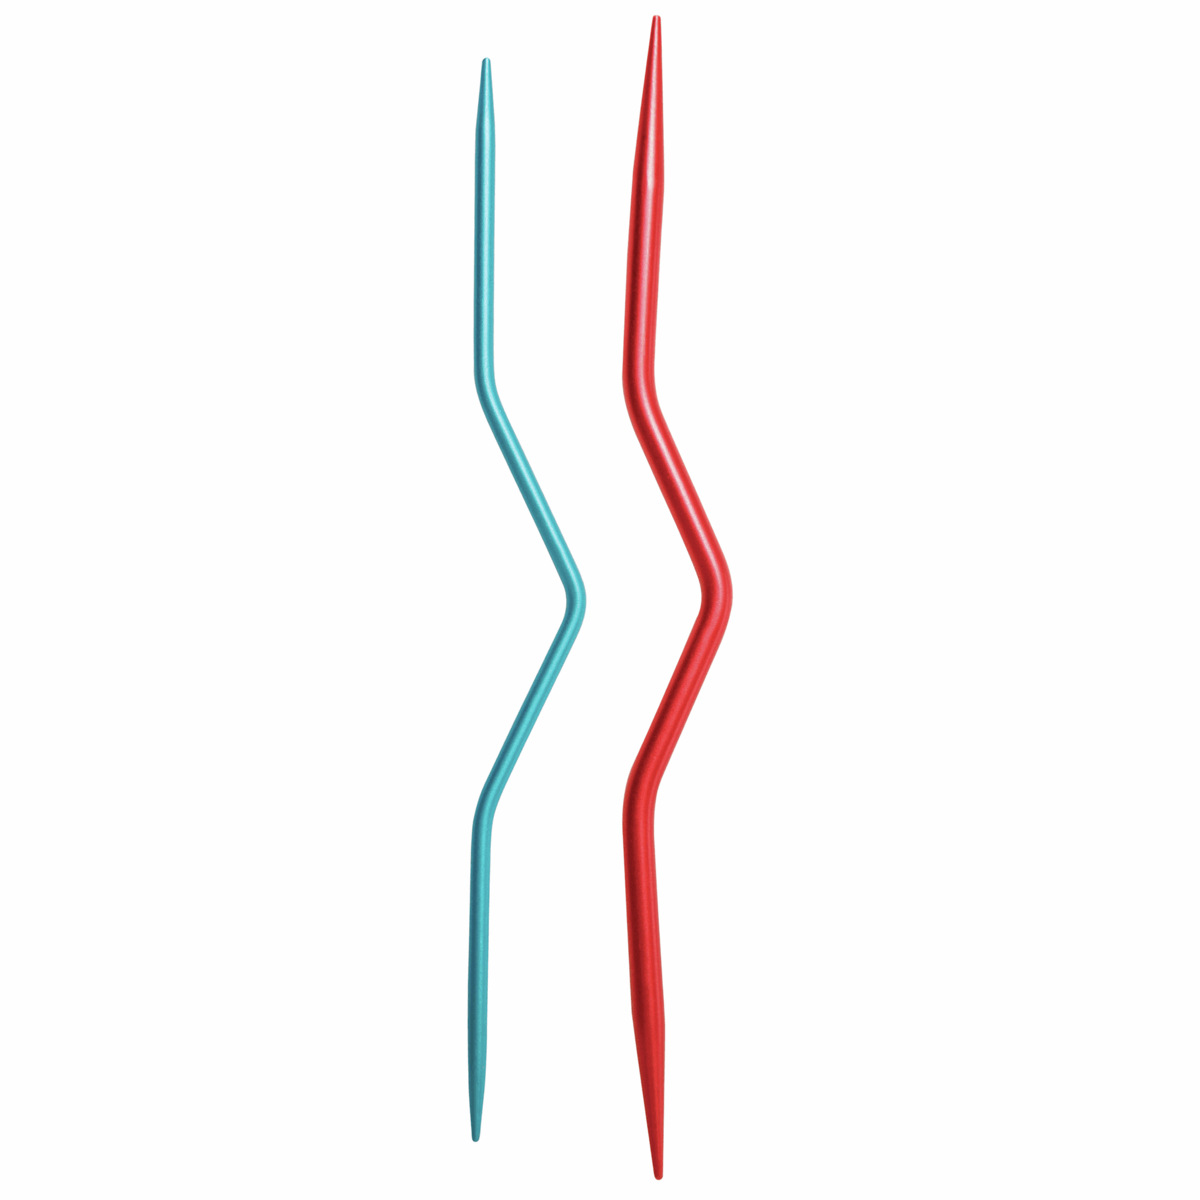 Knit Pro Bent Cable Needle - Set of 2